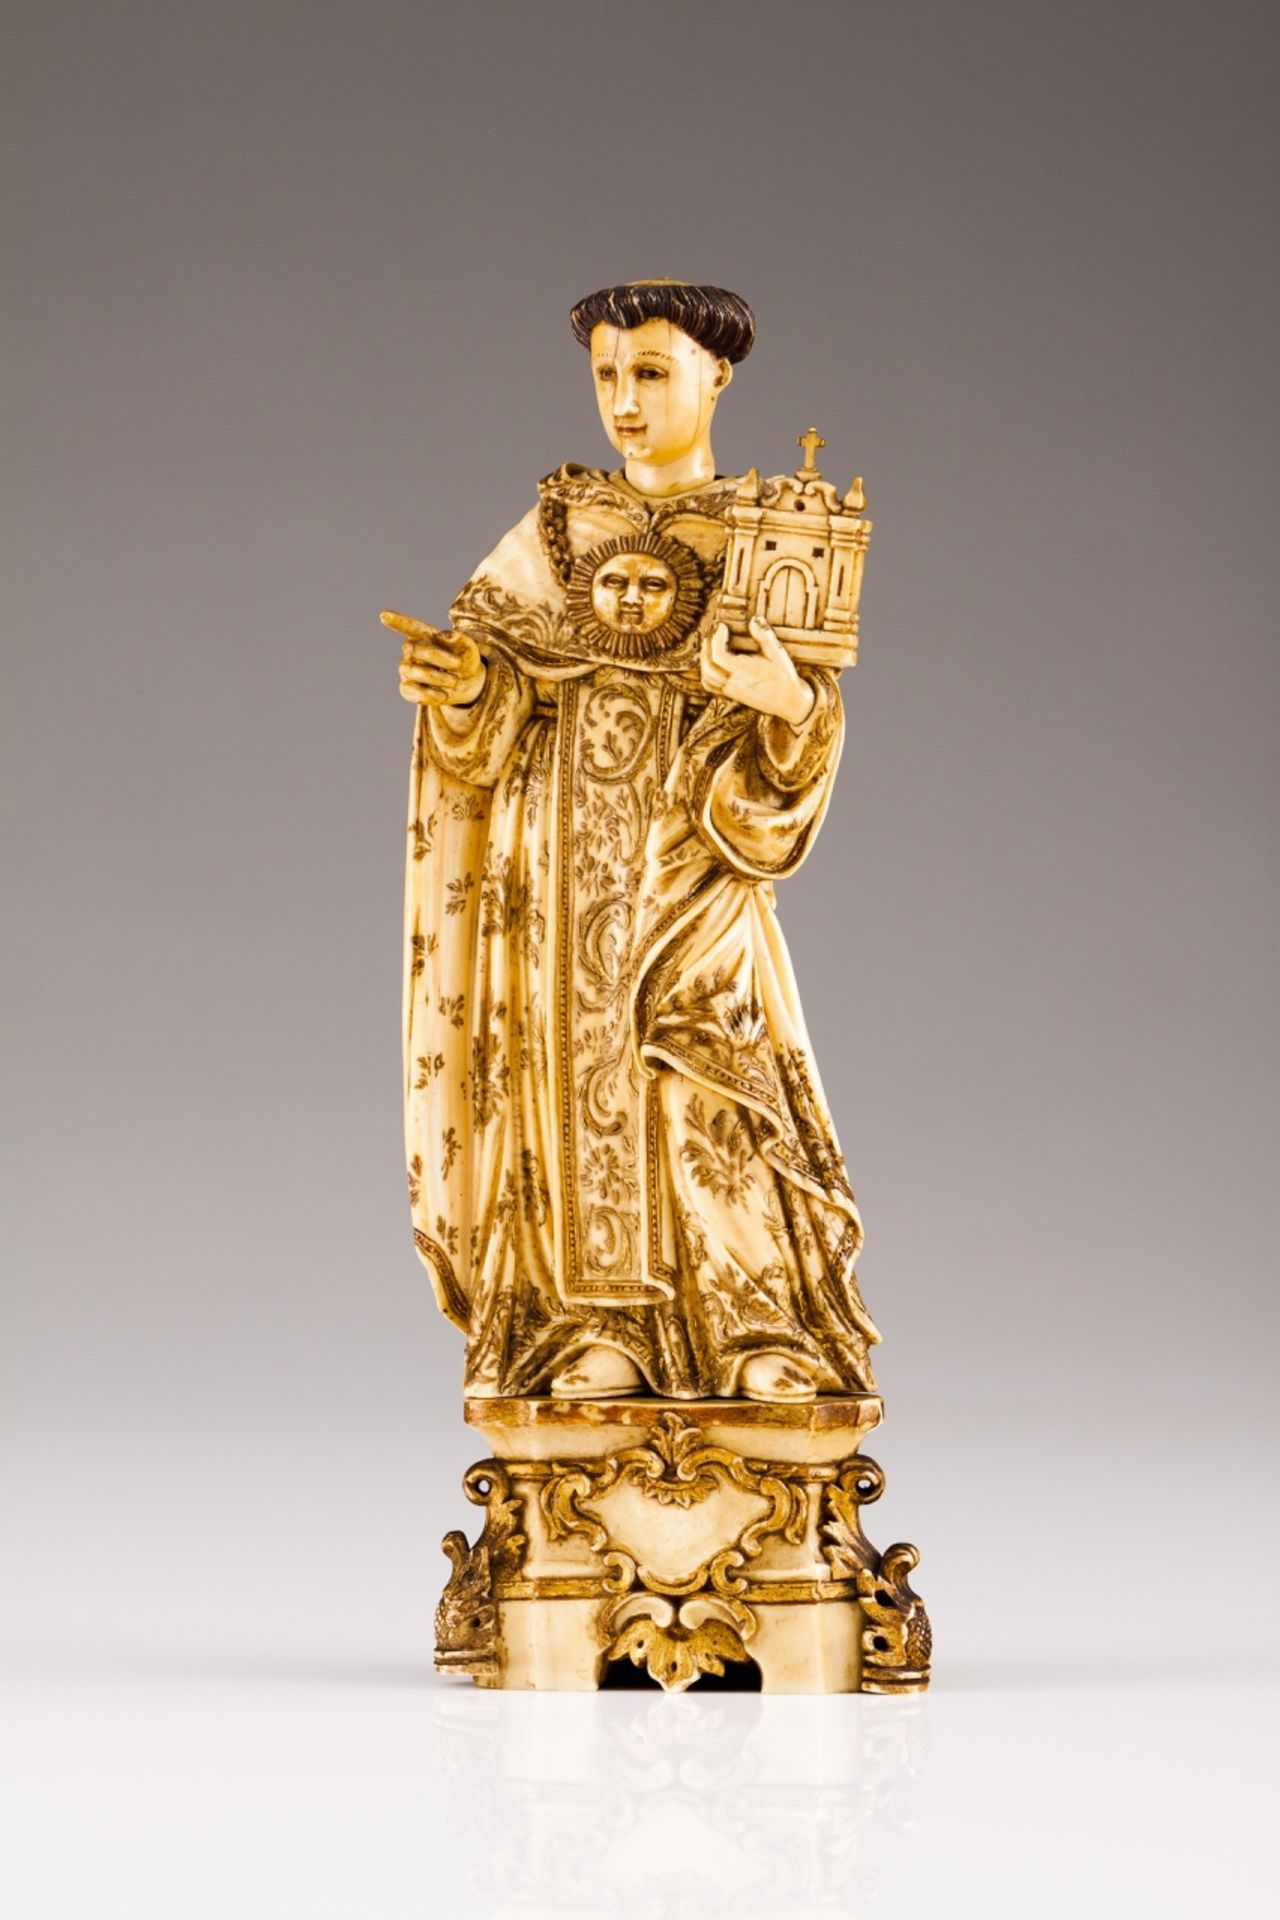 Saint Thomas Aquinas
Ivory Indo-Portuguese sculpture
Partly gilt, relief decorated clothes with